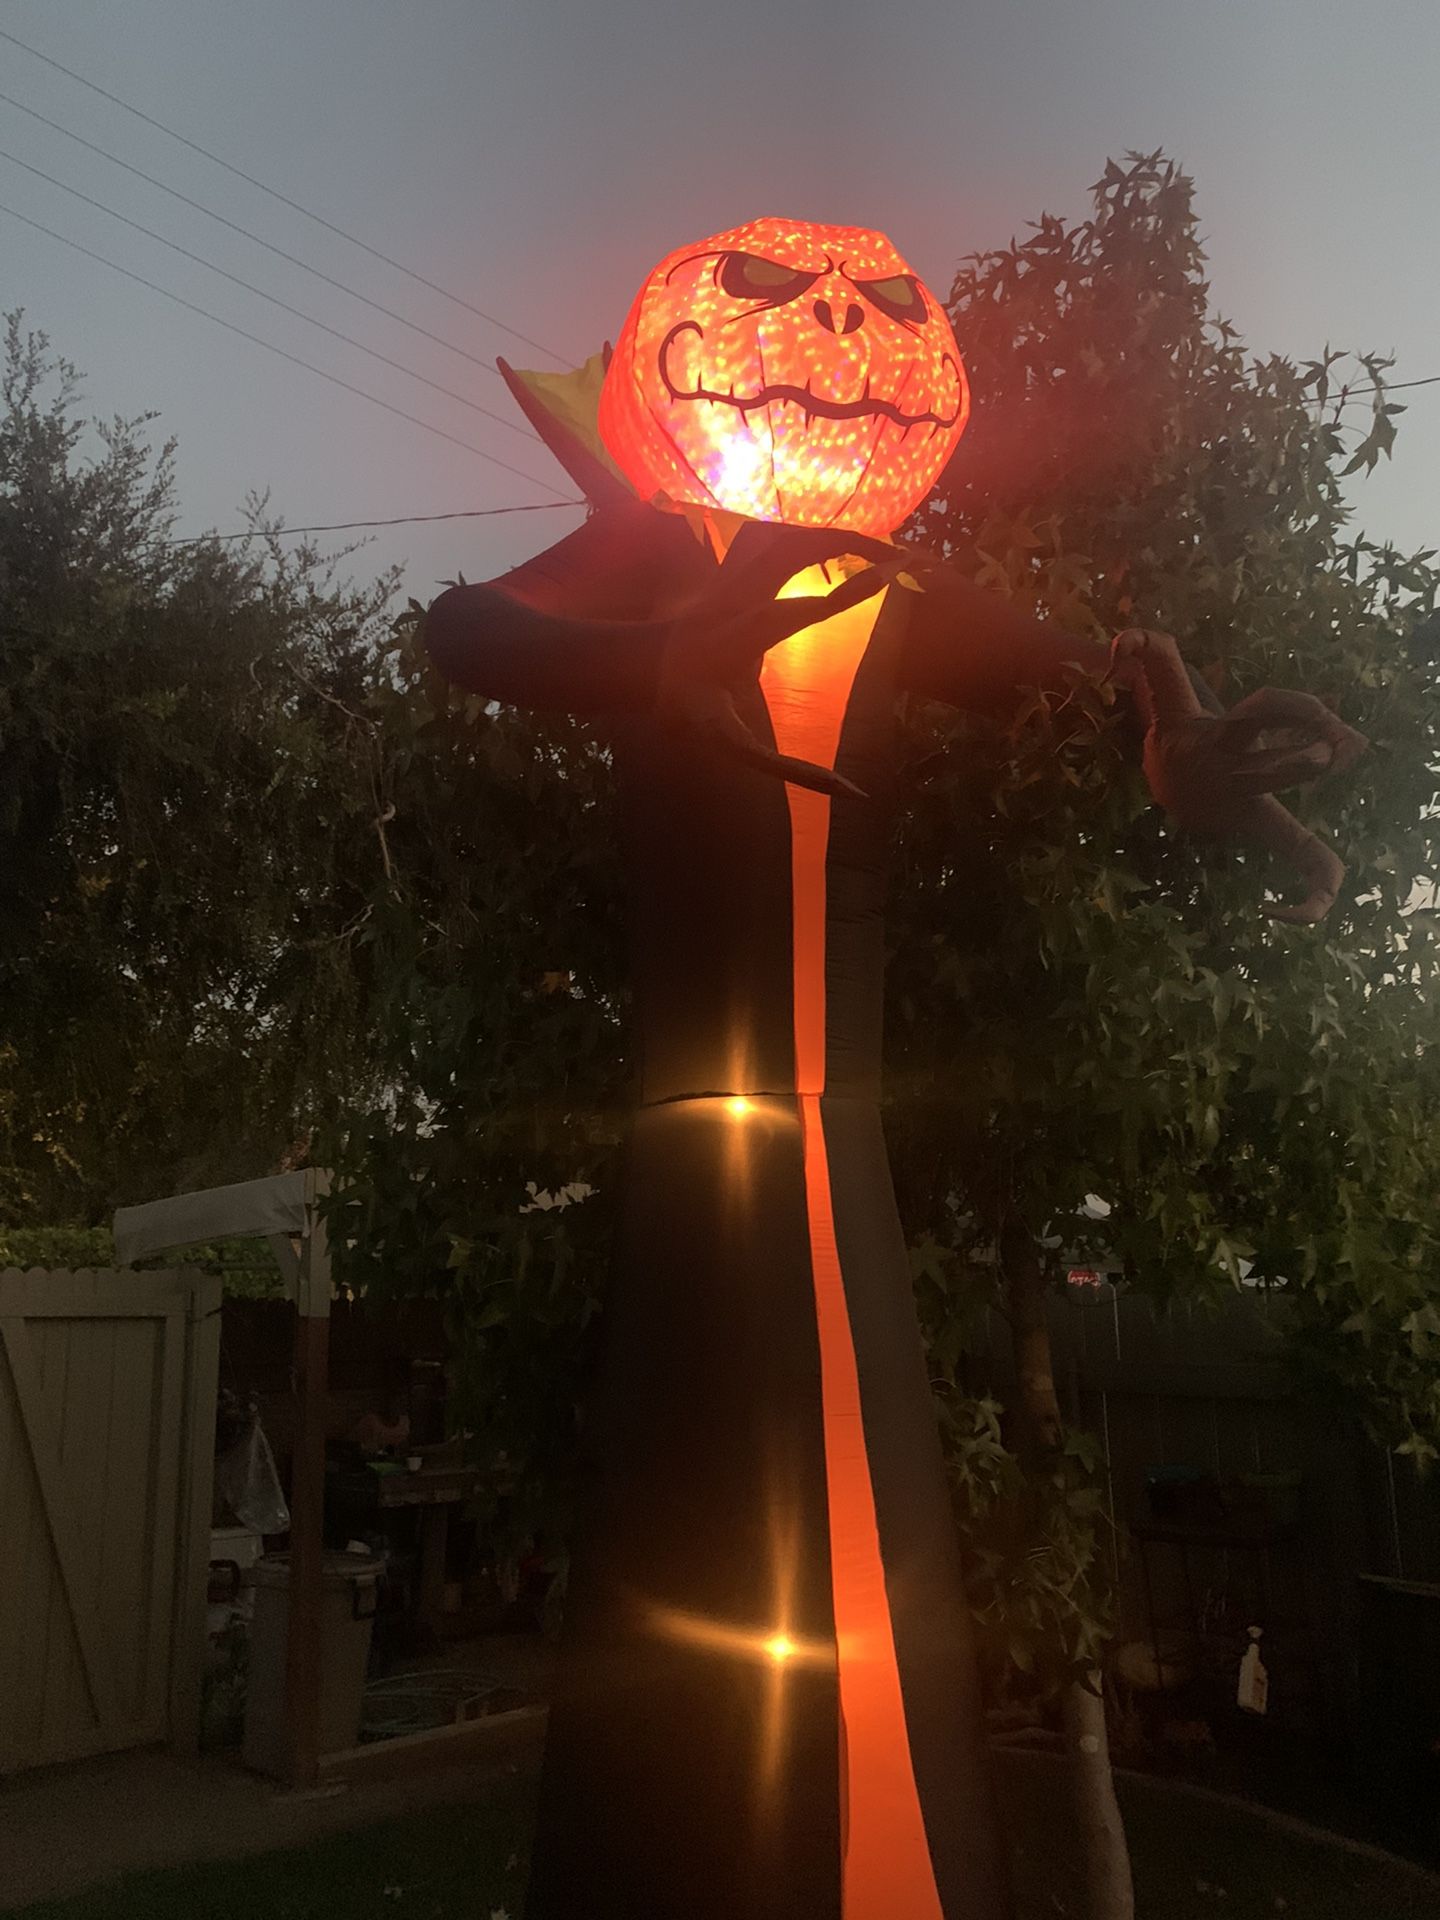 ***12ft !!! HALLOWEEN INFLATABLE PUMPKIN REAPER NEVER DISPLAYED PERFECT !! 12FT TALL ***